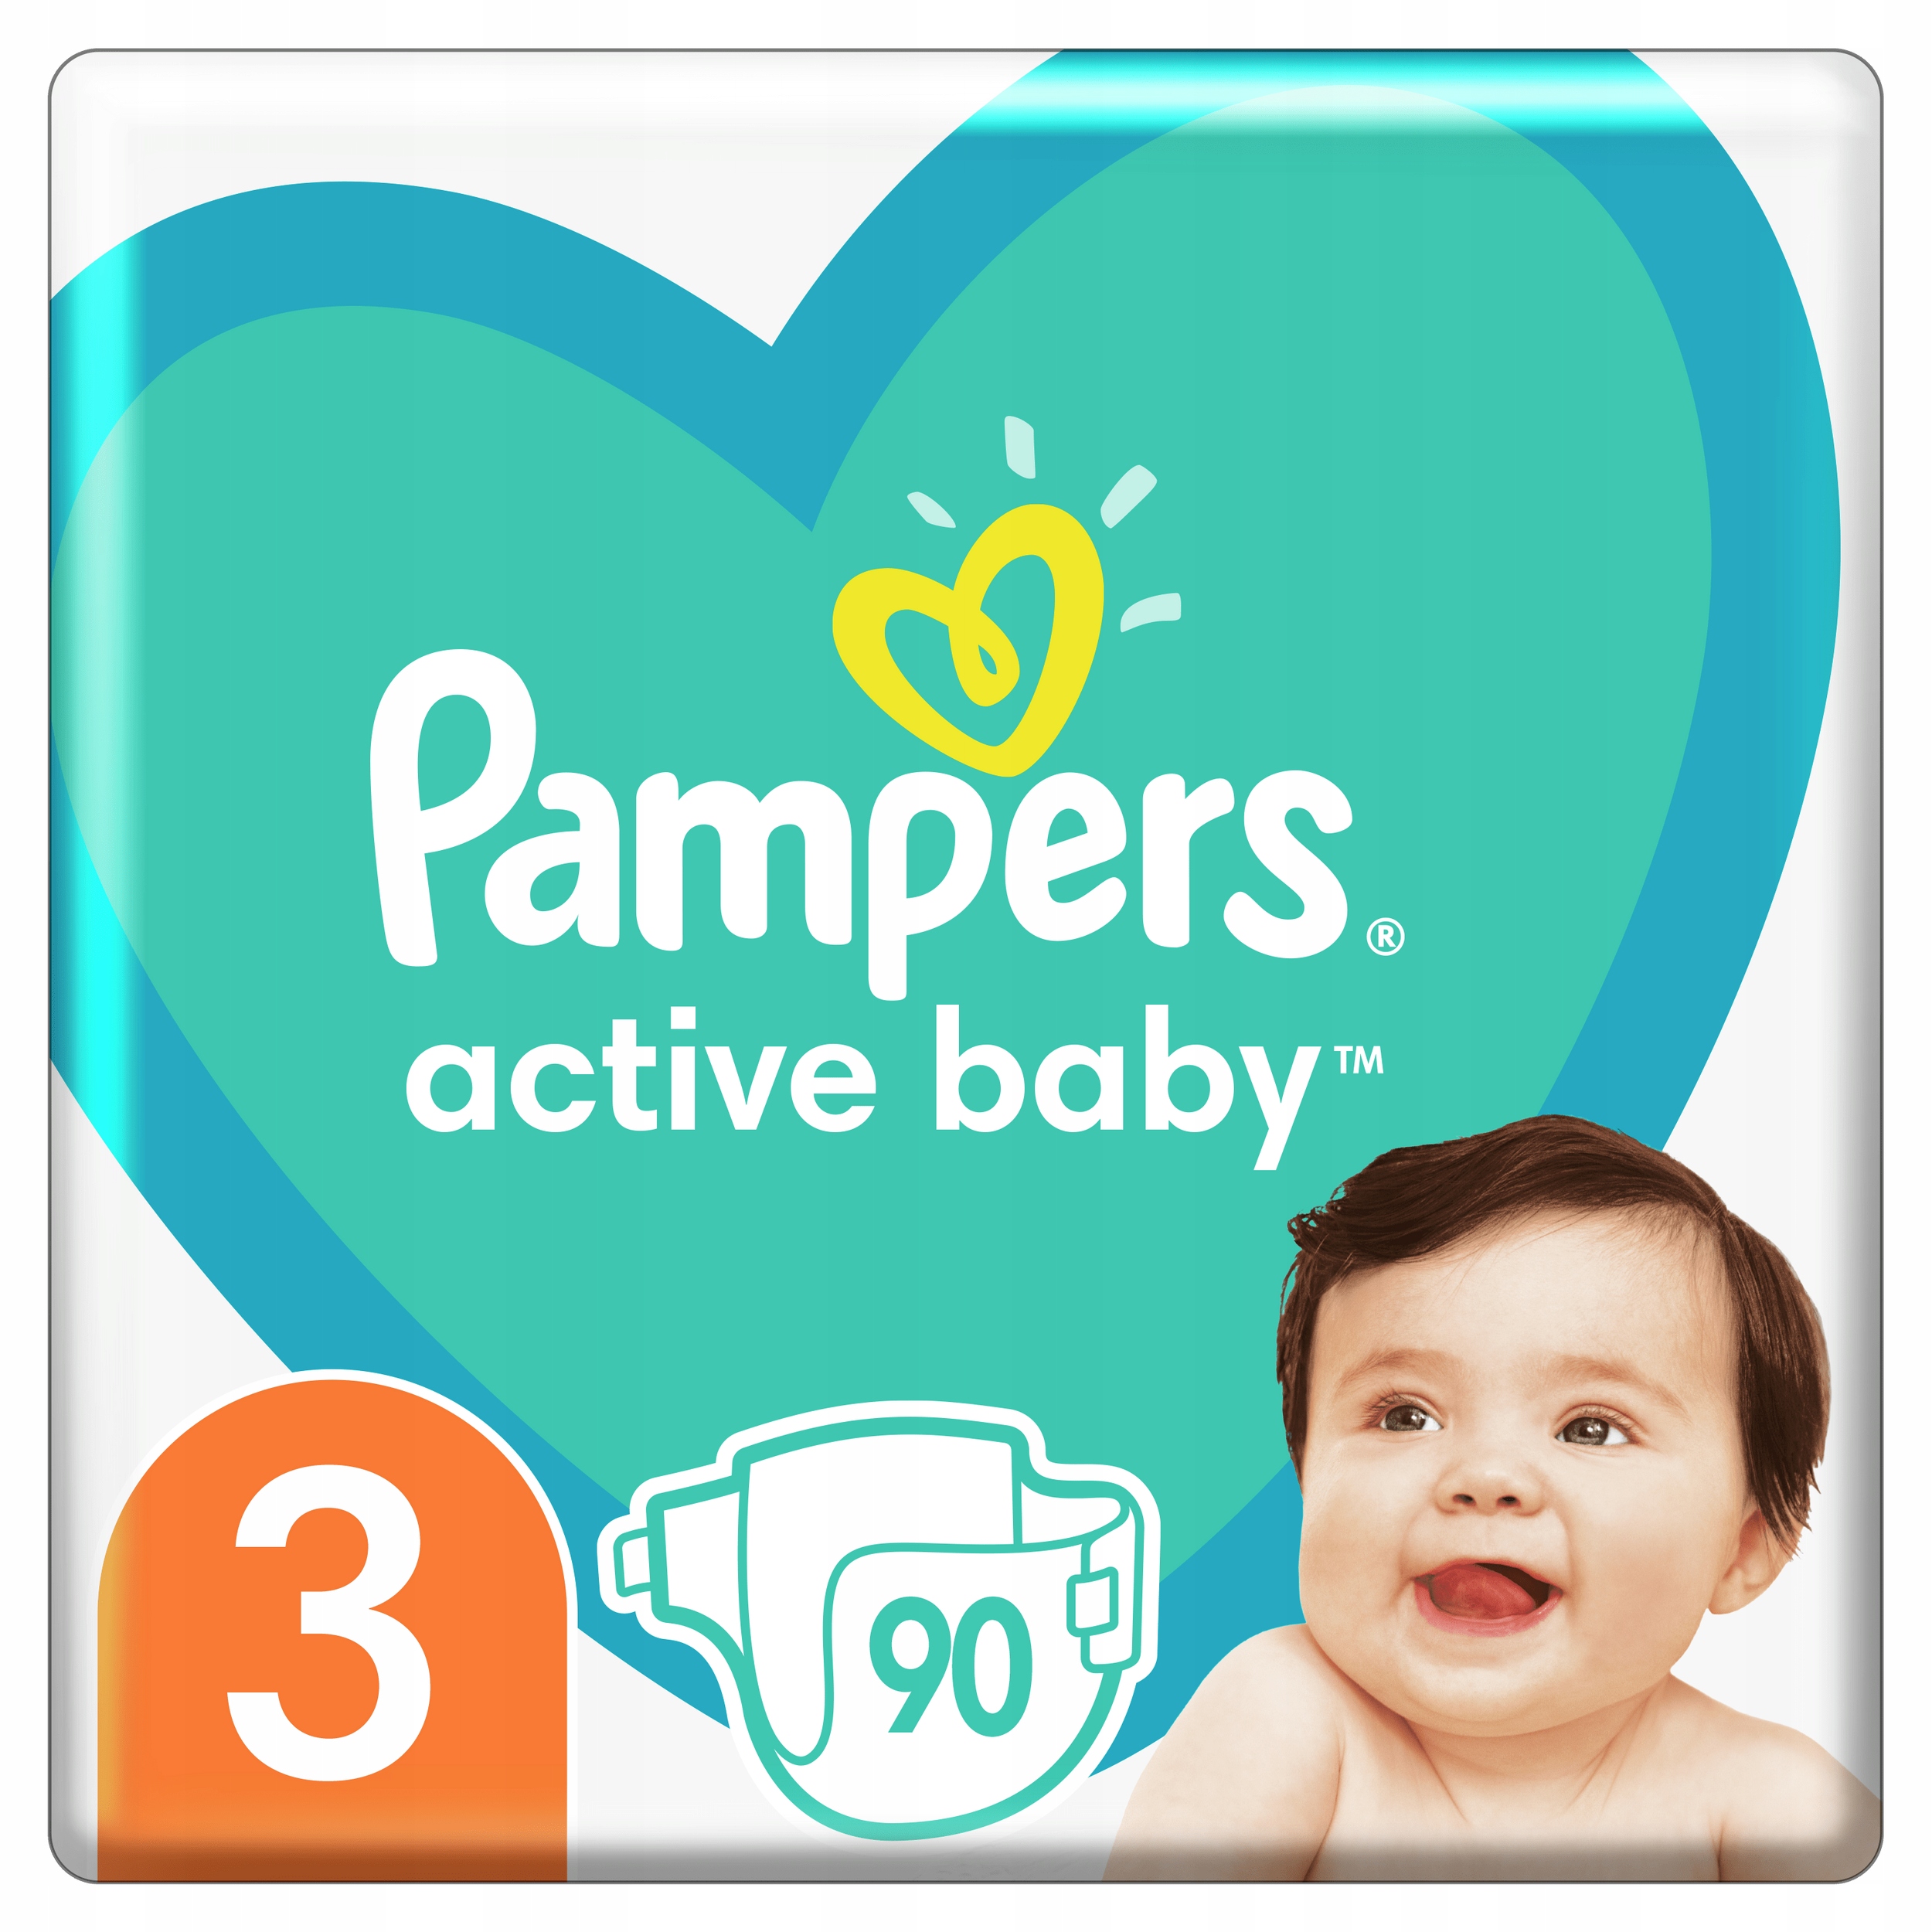 pampersy pampers 4 208